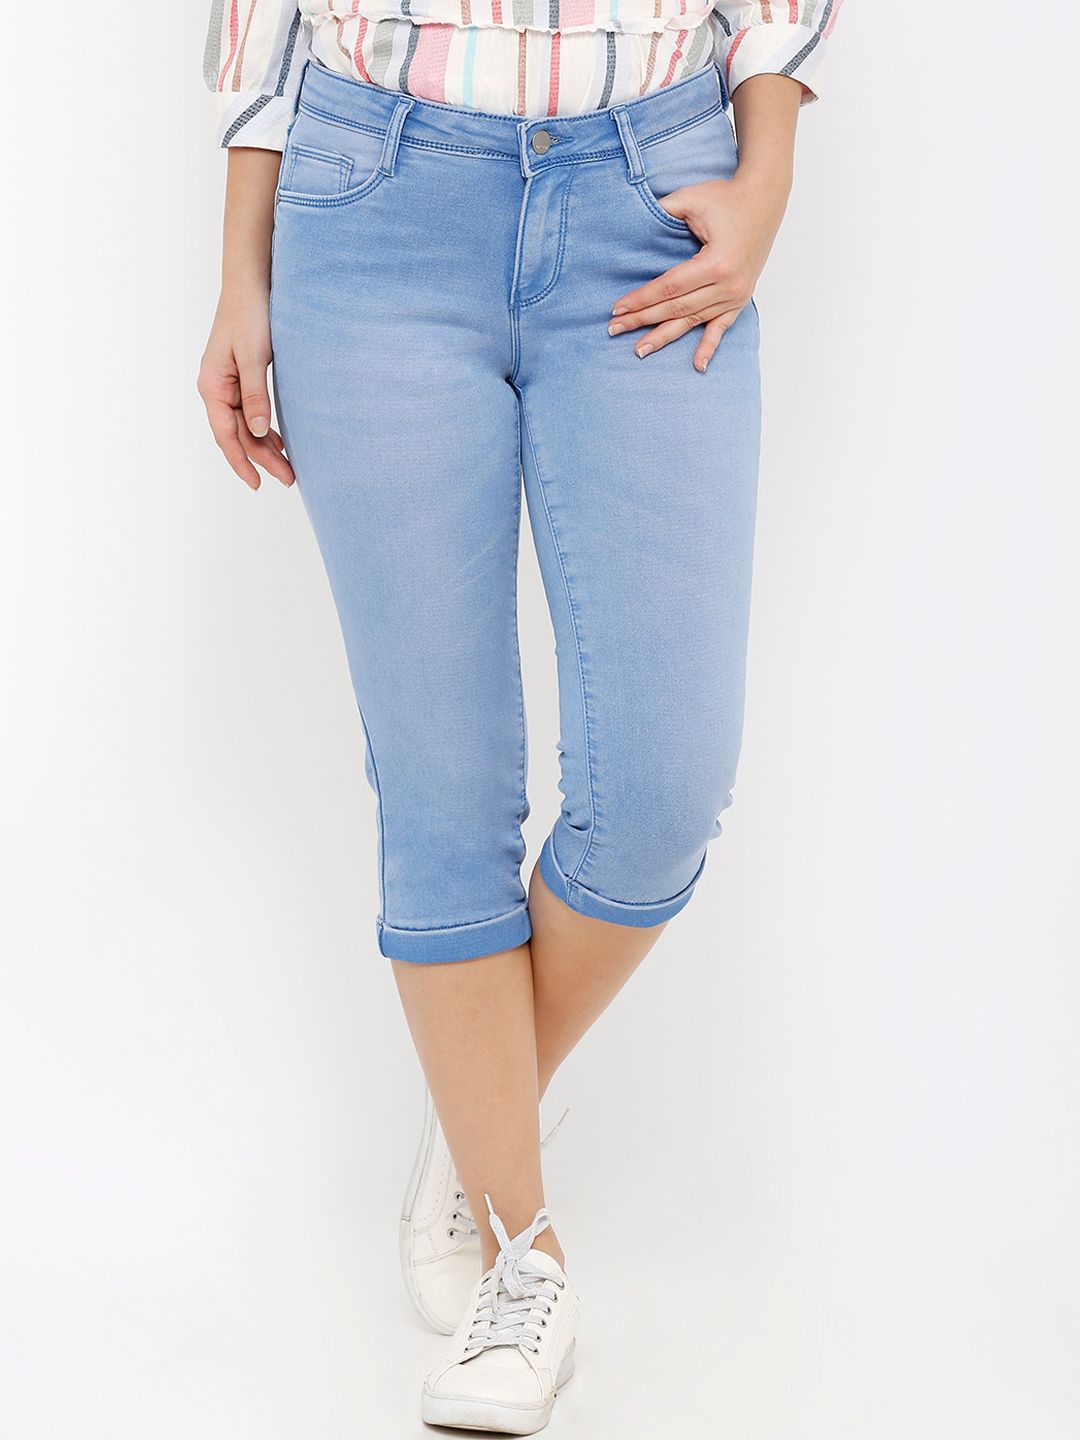 Kraus Jeans Women Blue Slim Fit Light Fade Stretchable Jeans Price in India